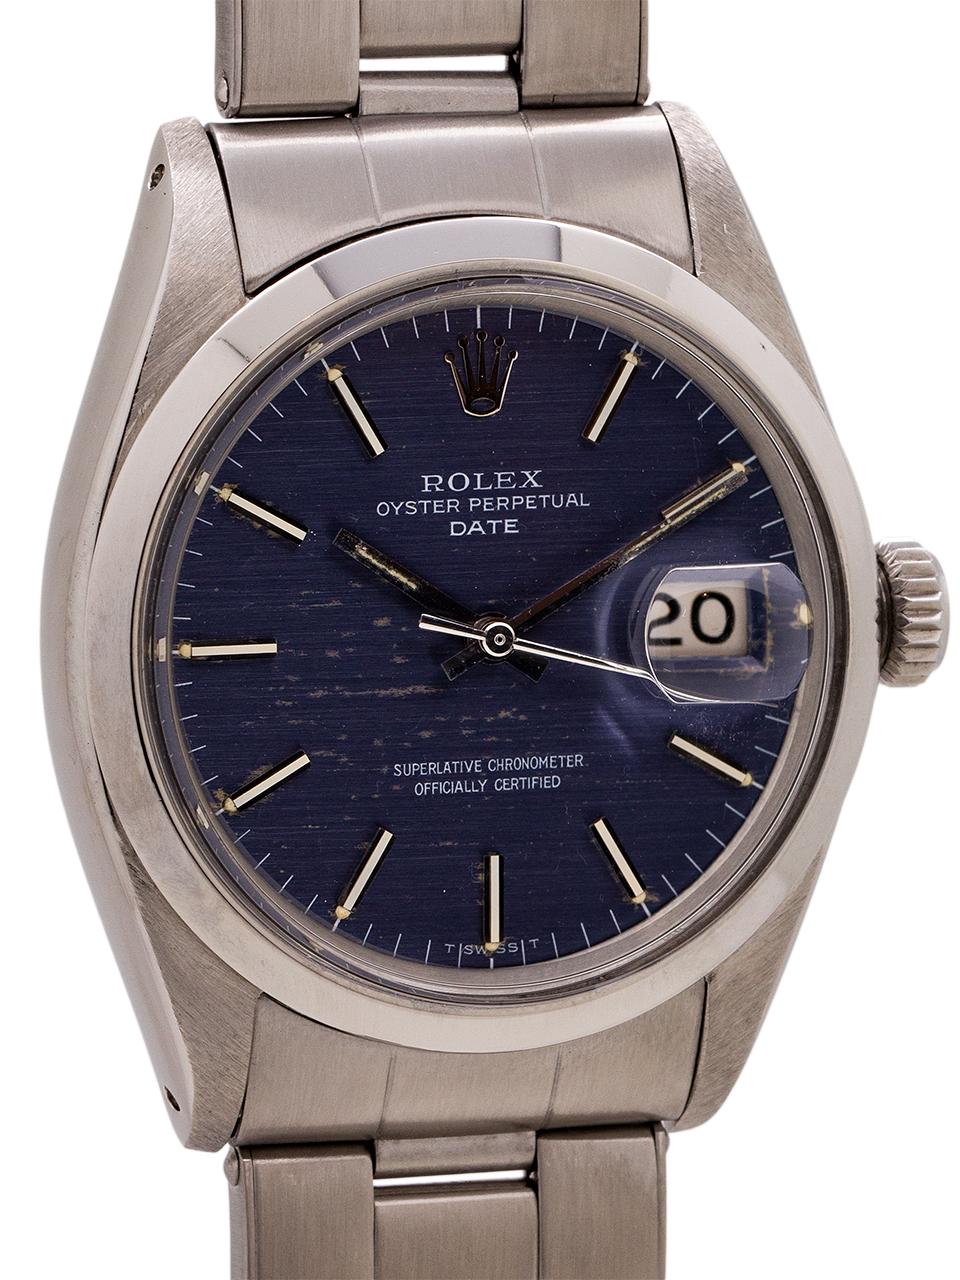 1967 rolex oyster perpetual datejust